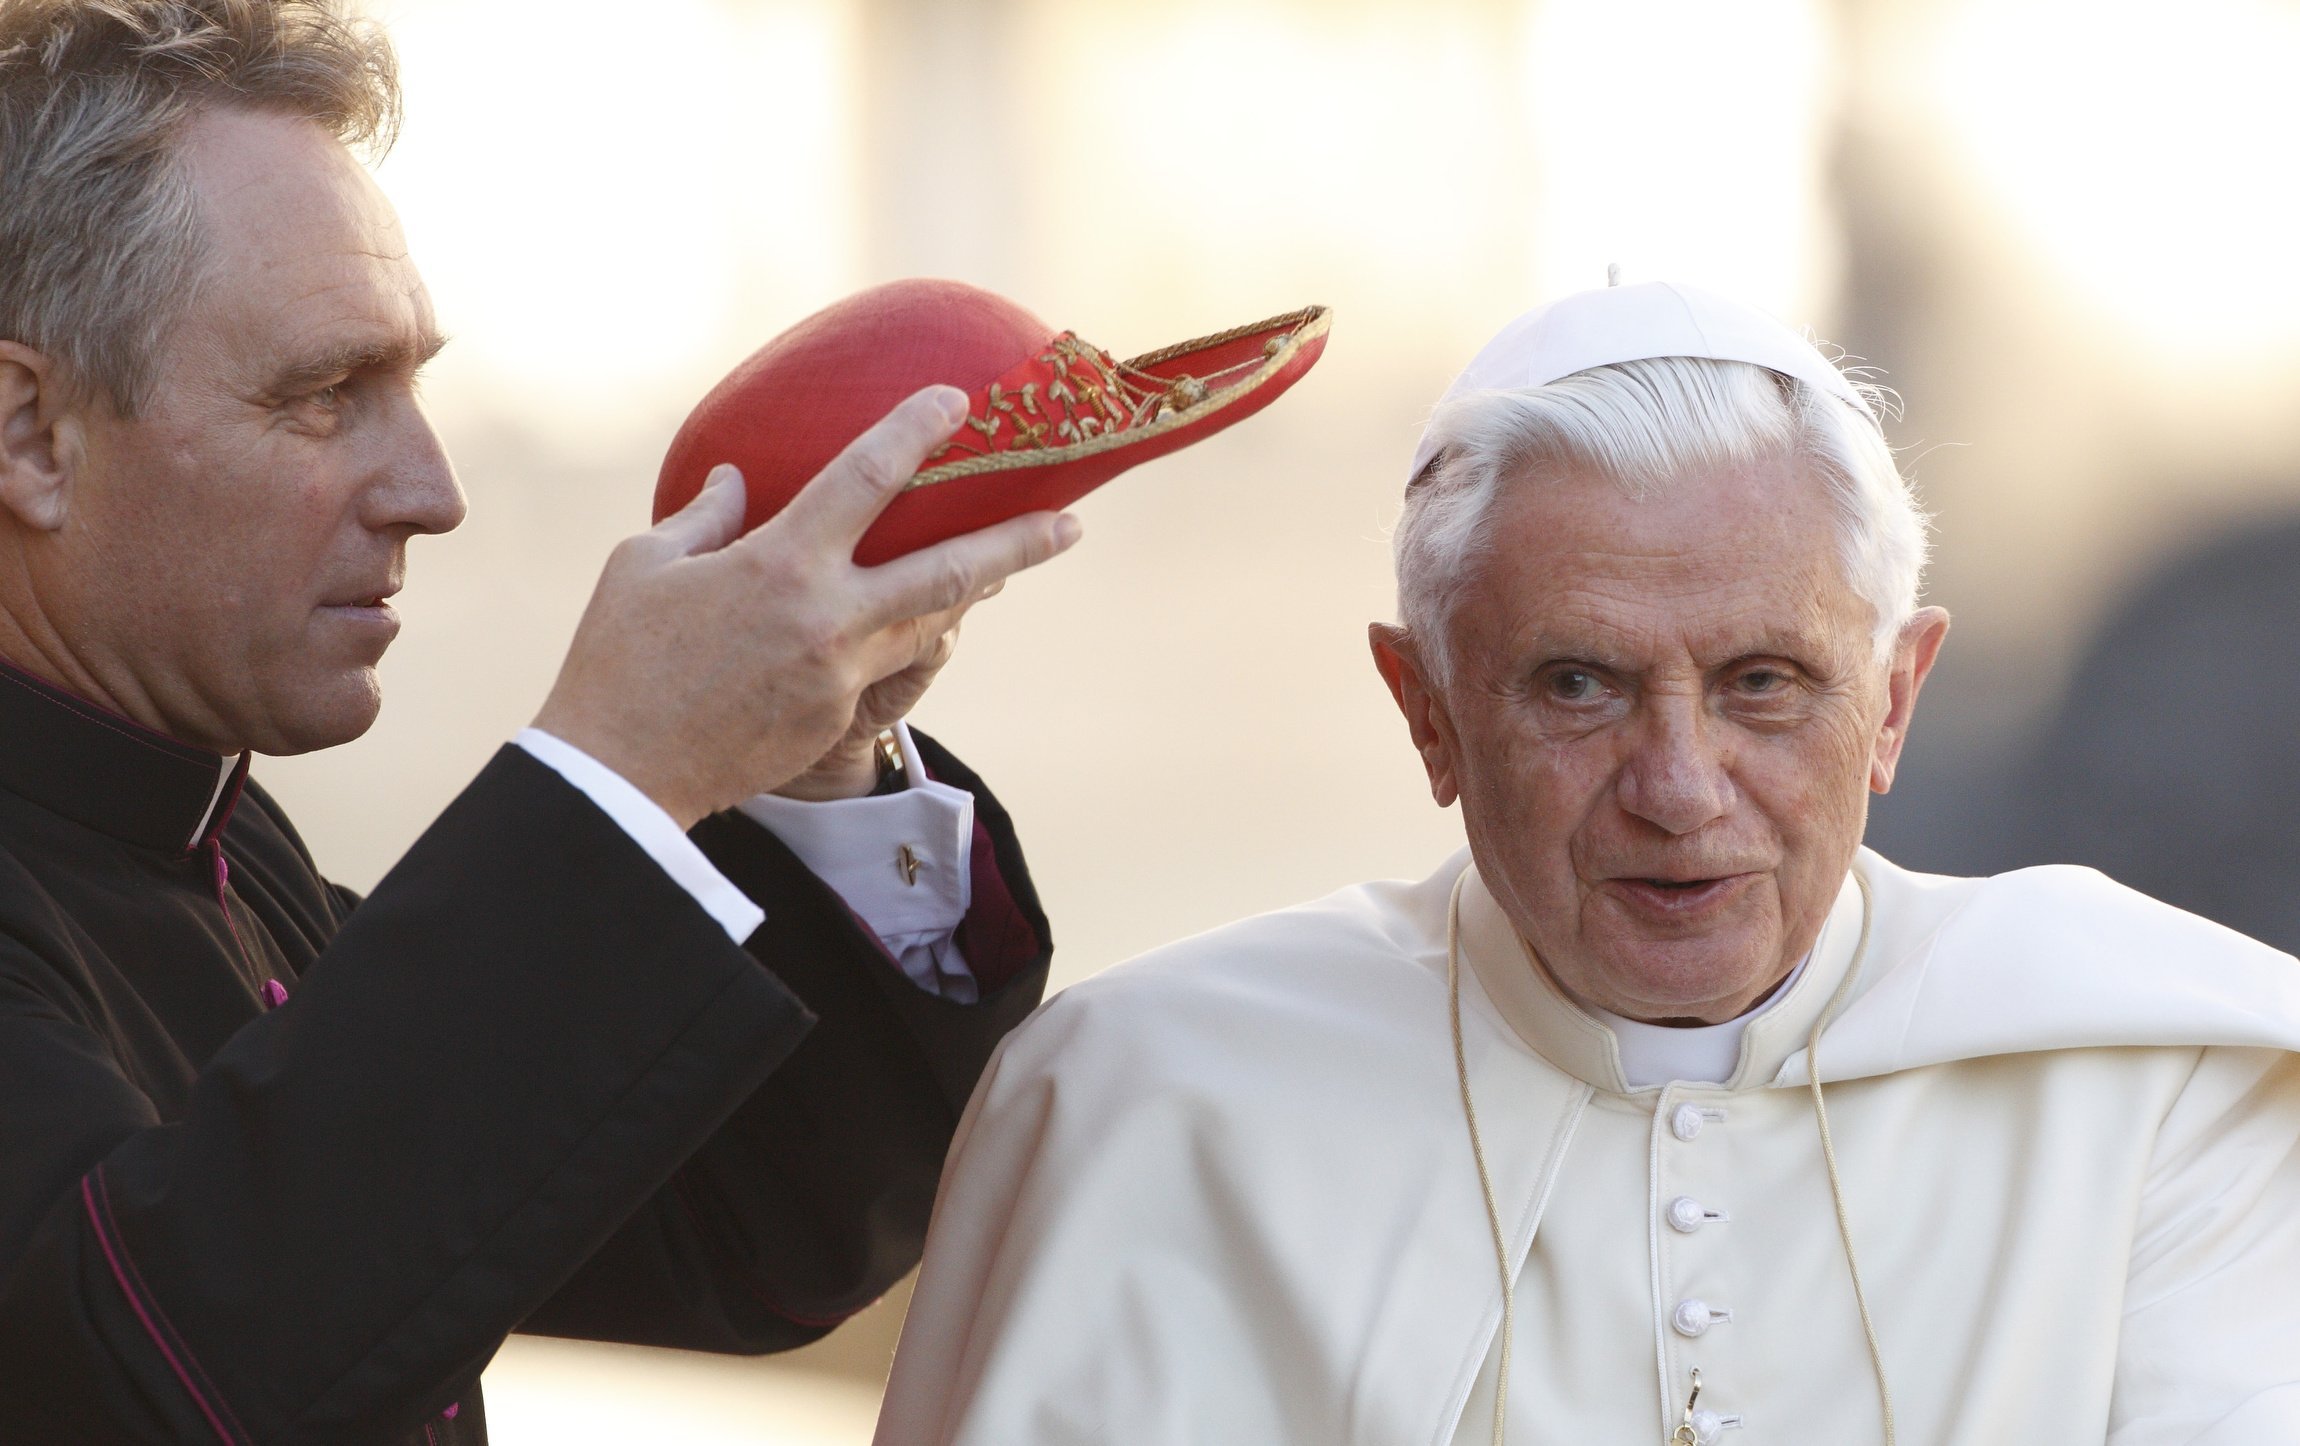 Then-Msgr. Georg Ganswein places a red hat on Pope Benedict XVI.